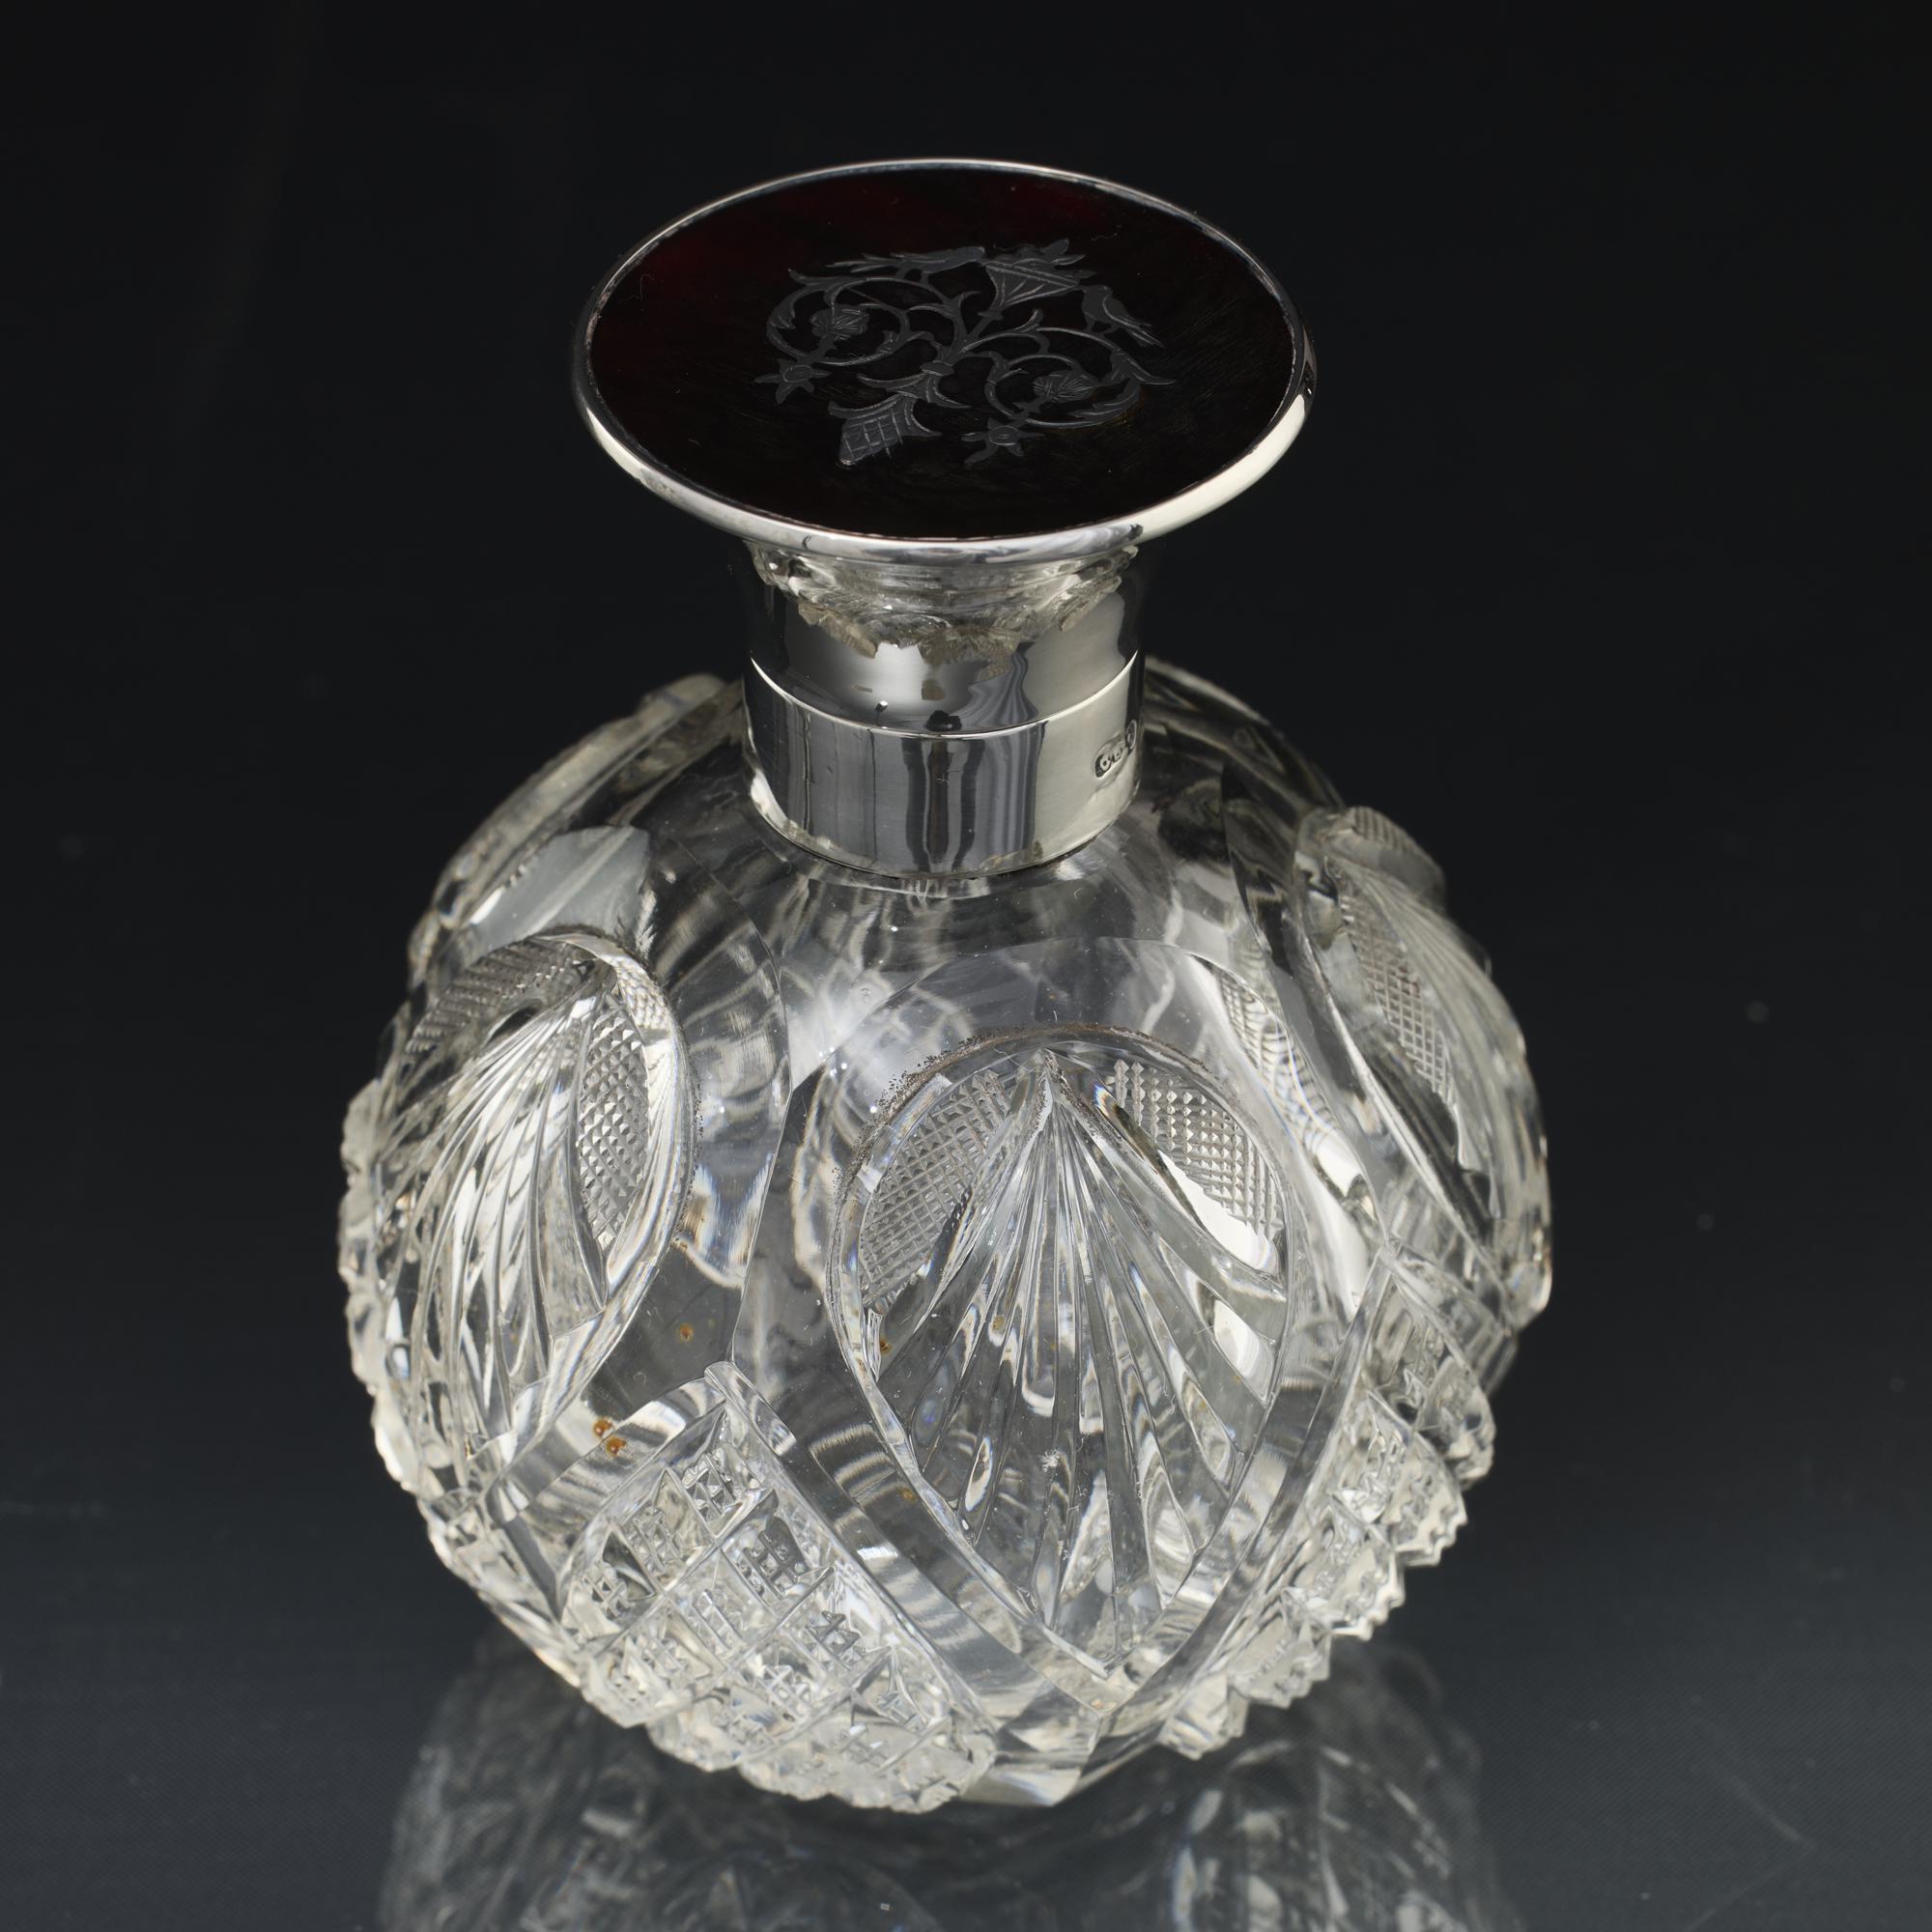 British Pair of antique cut glass perfume bottles with silver & tortoiseshell covers For Sale